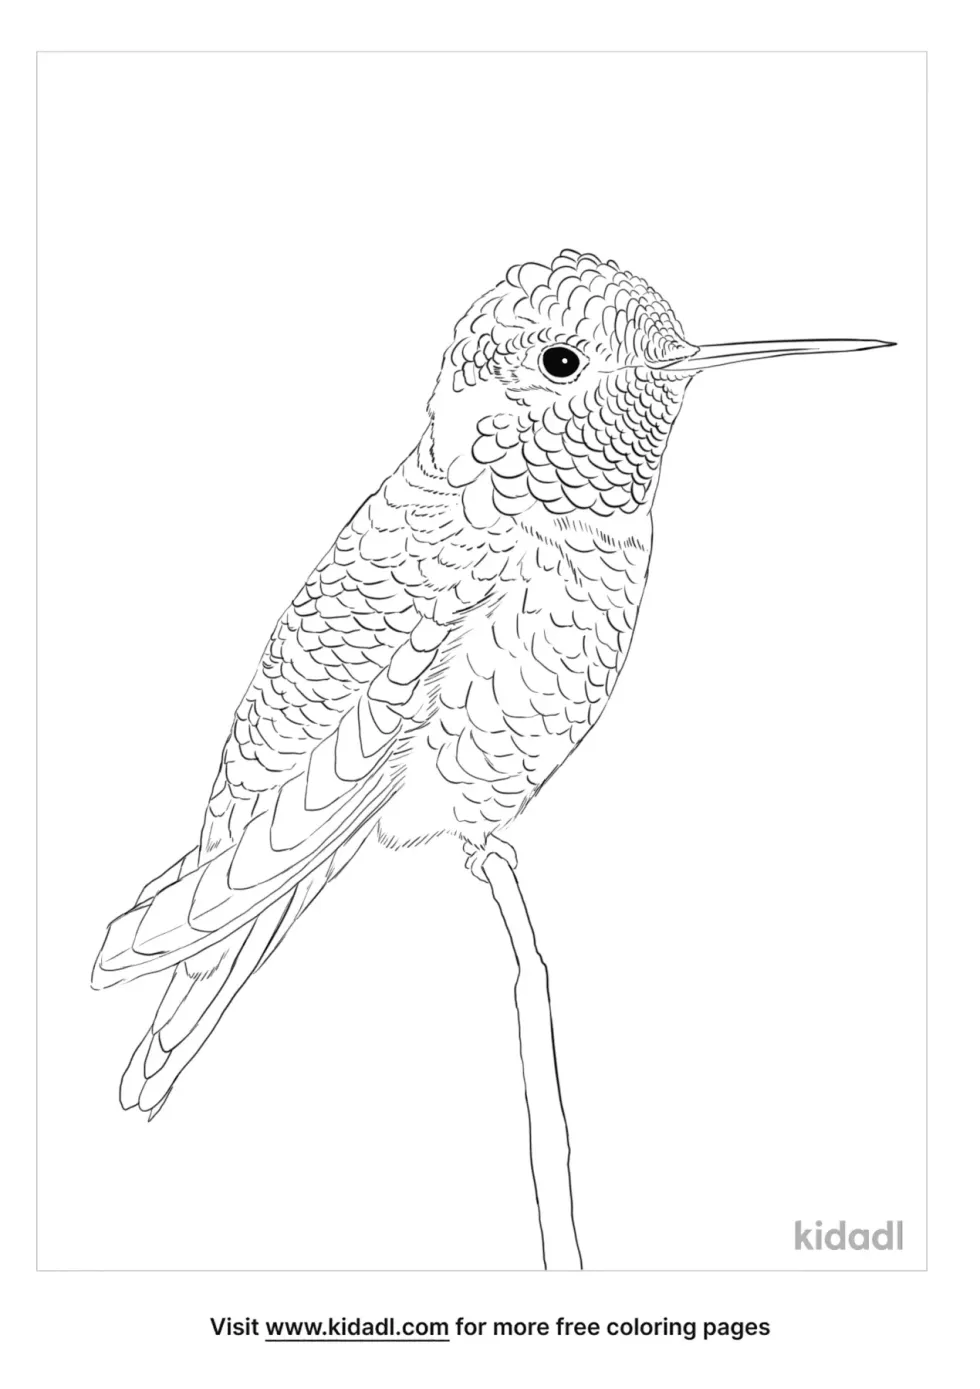 Anna's Hummingbird Coloring Page